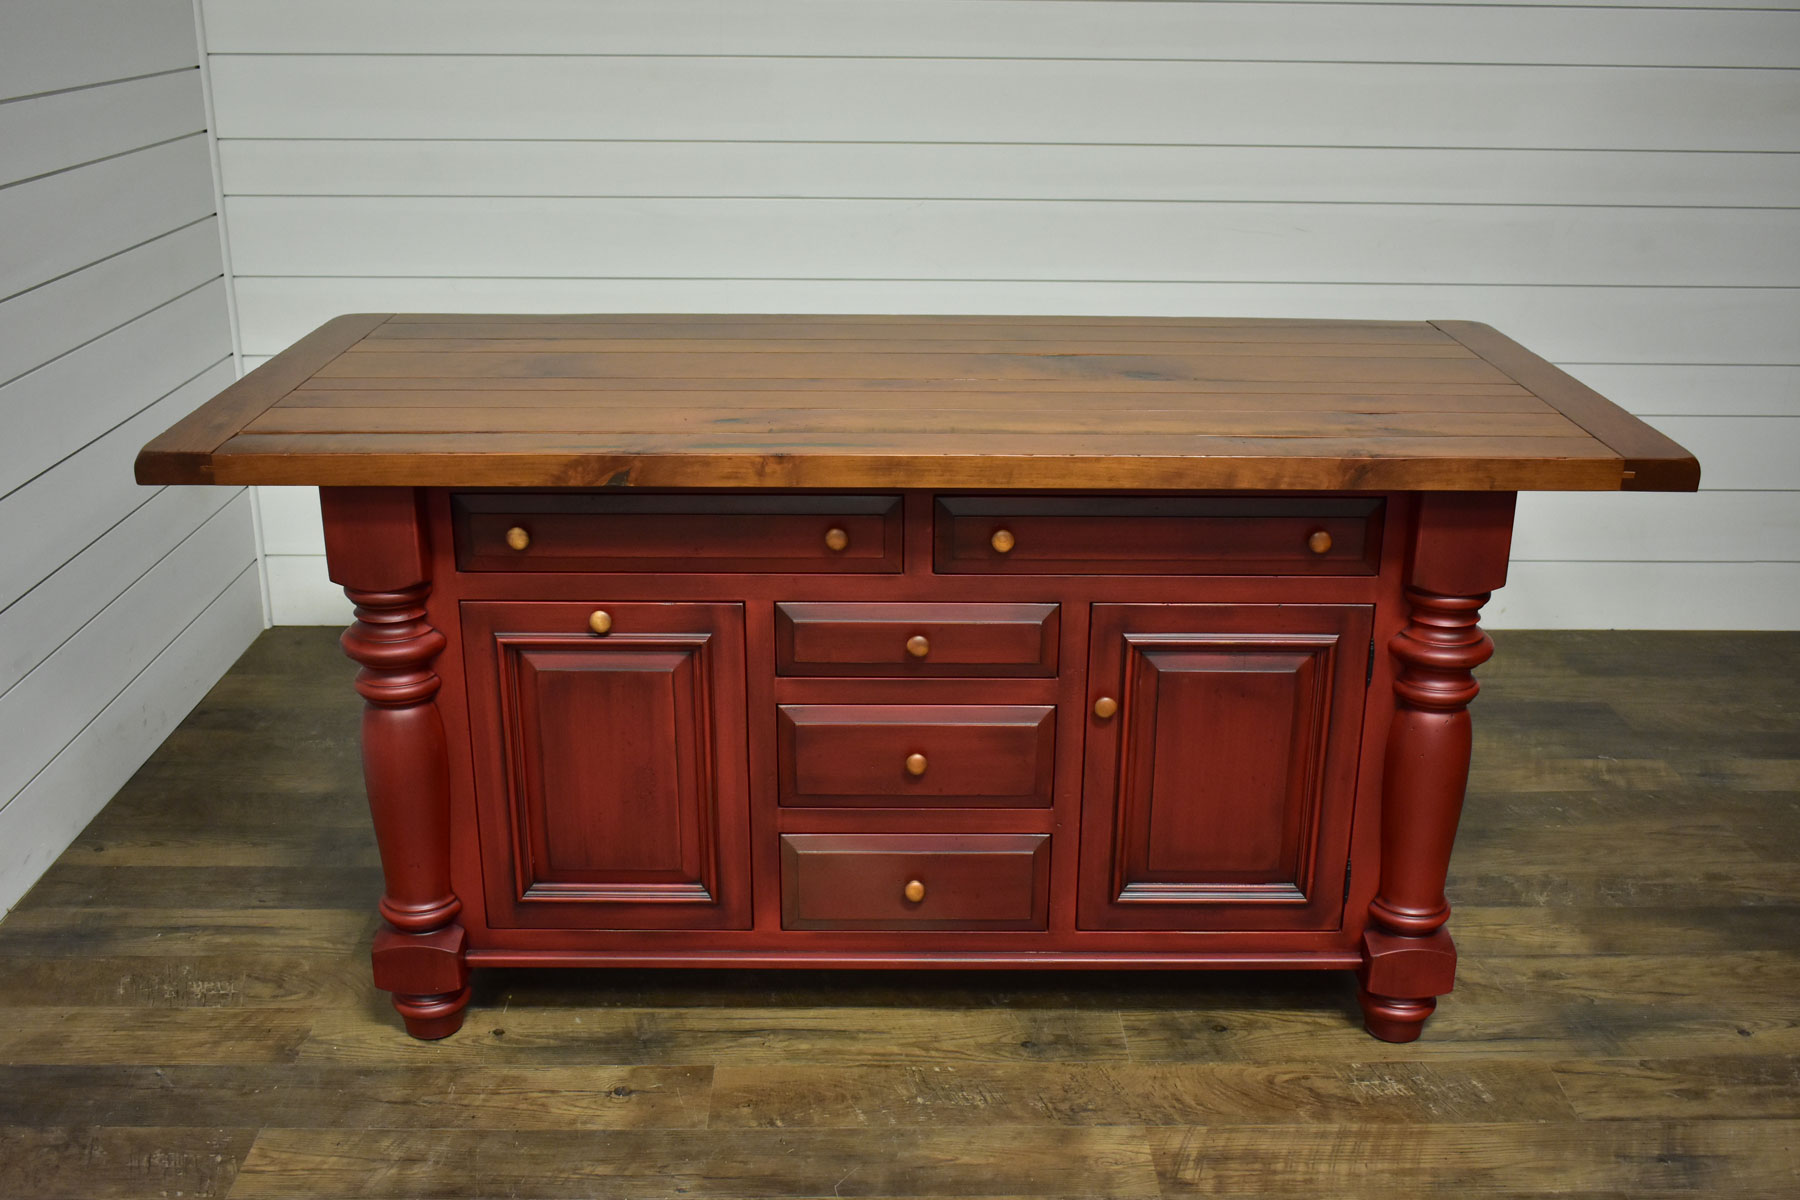 Constance Bay Kitchen Island with Rustic Cherry Top and Brown Maple Base